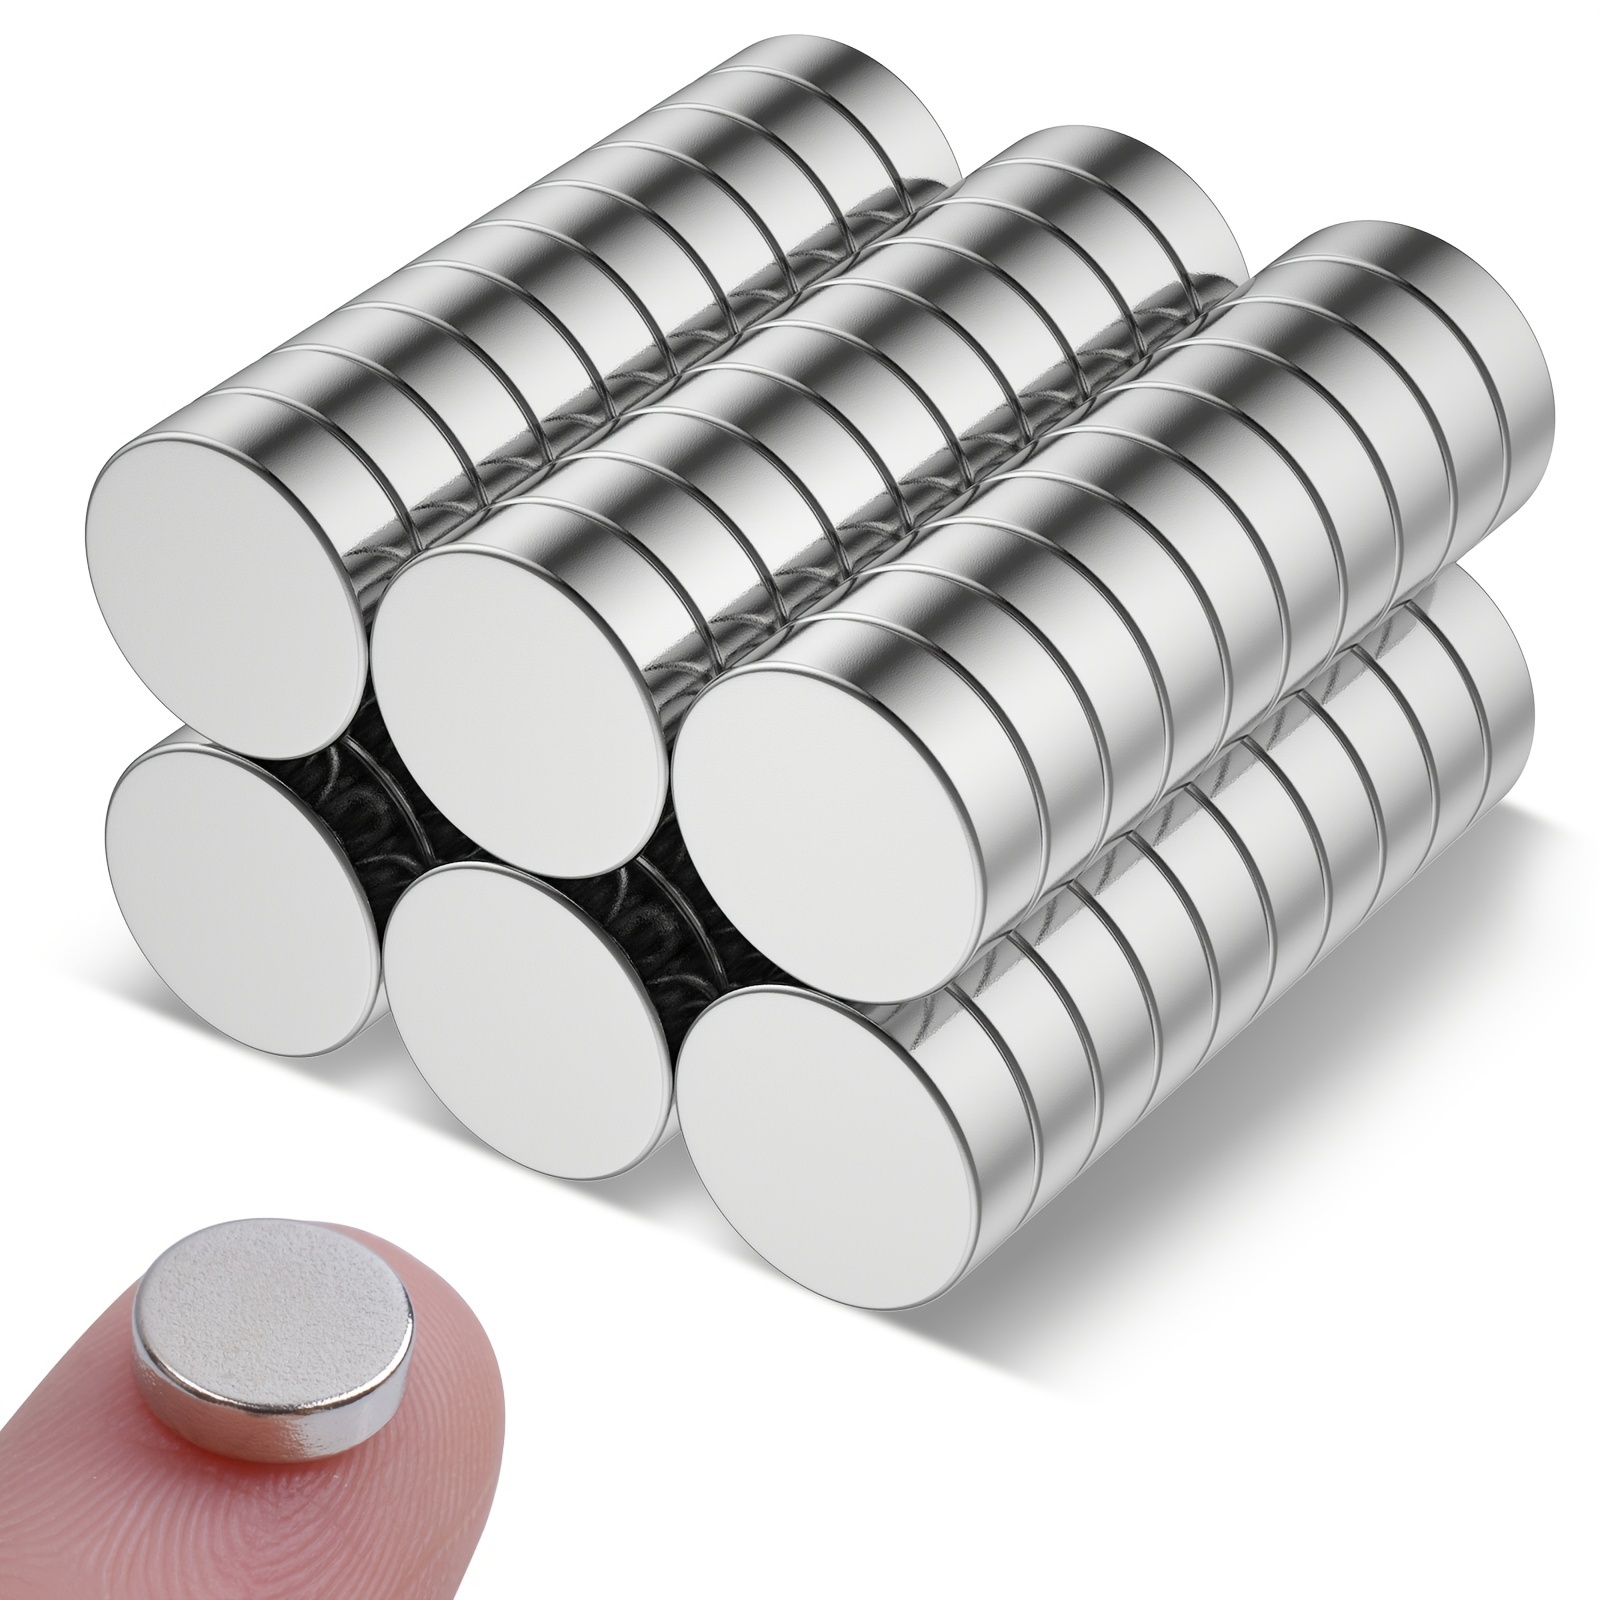 60Pcs Small Magnets,5 Different Size Round Magnets,Neodymium Magnets,Mini  Strong Magnet,Rare Earth Magnets for Crafts,Multi-Use Circle Round Magnets